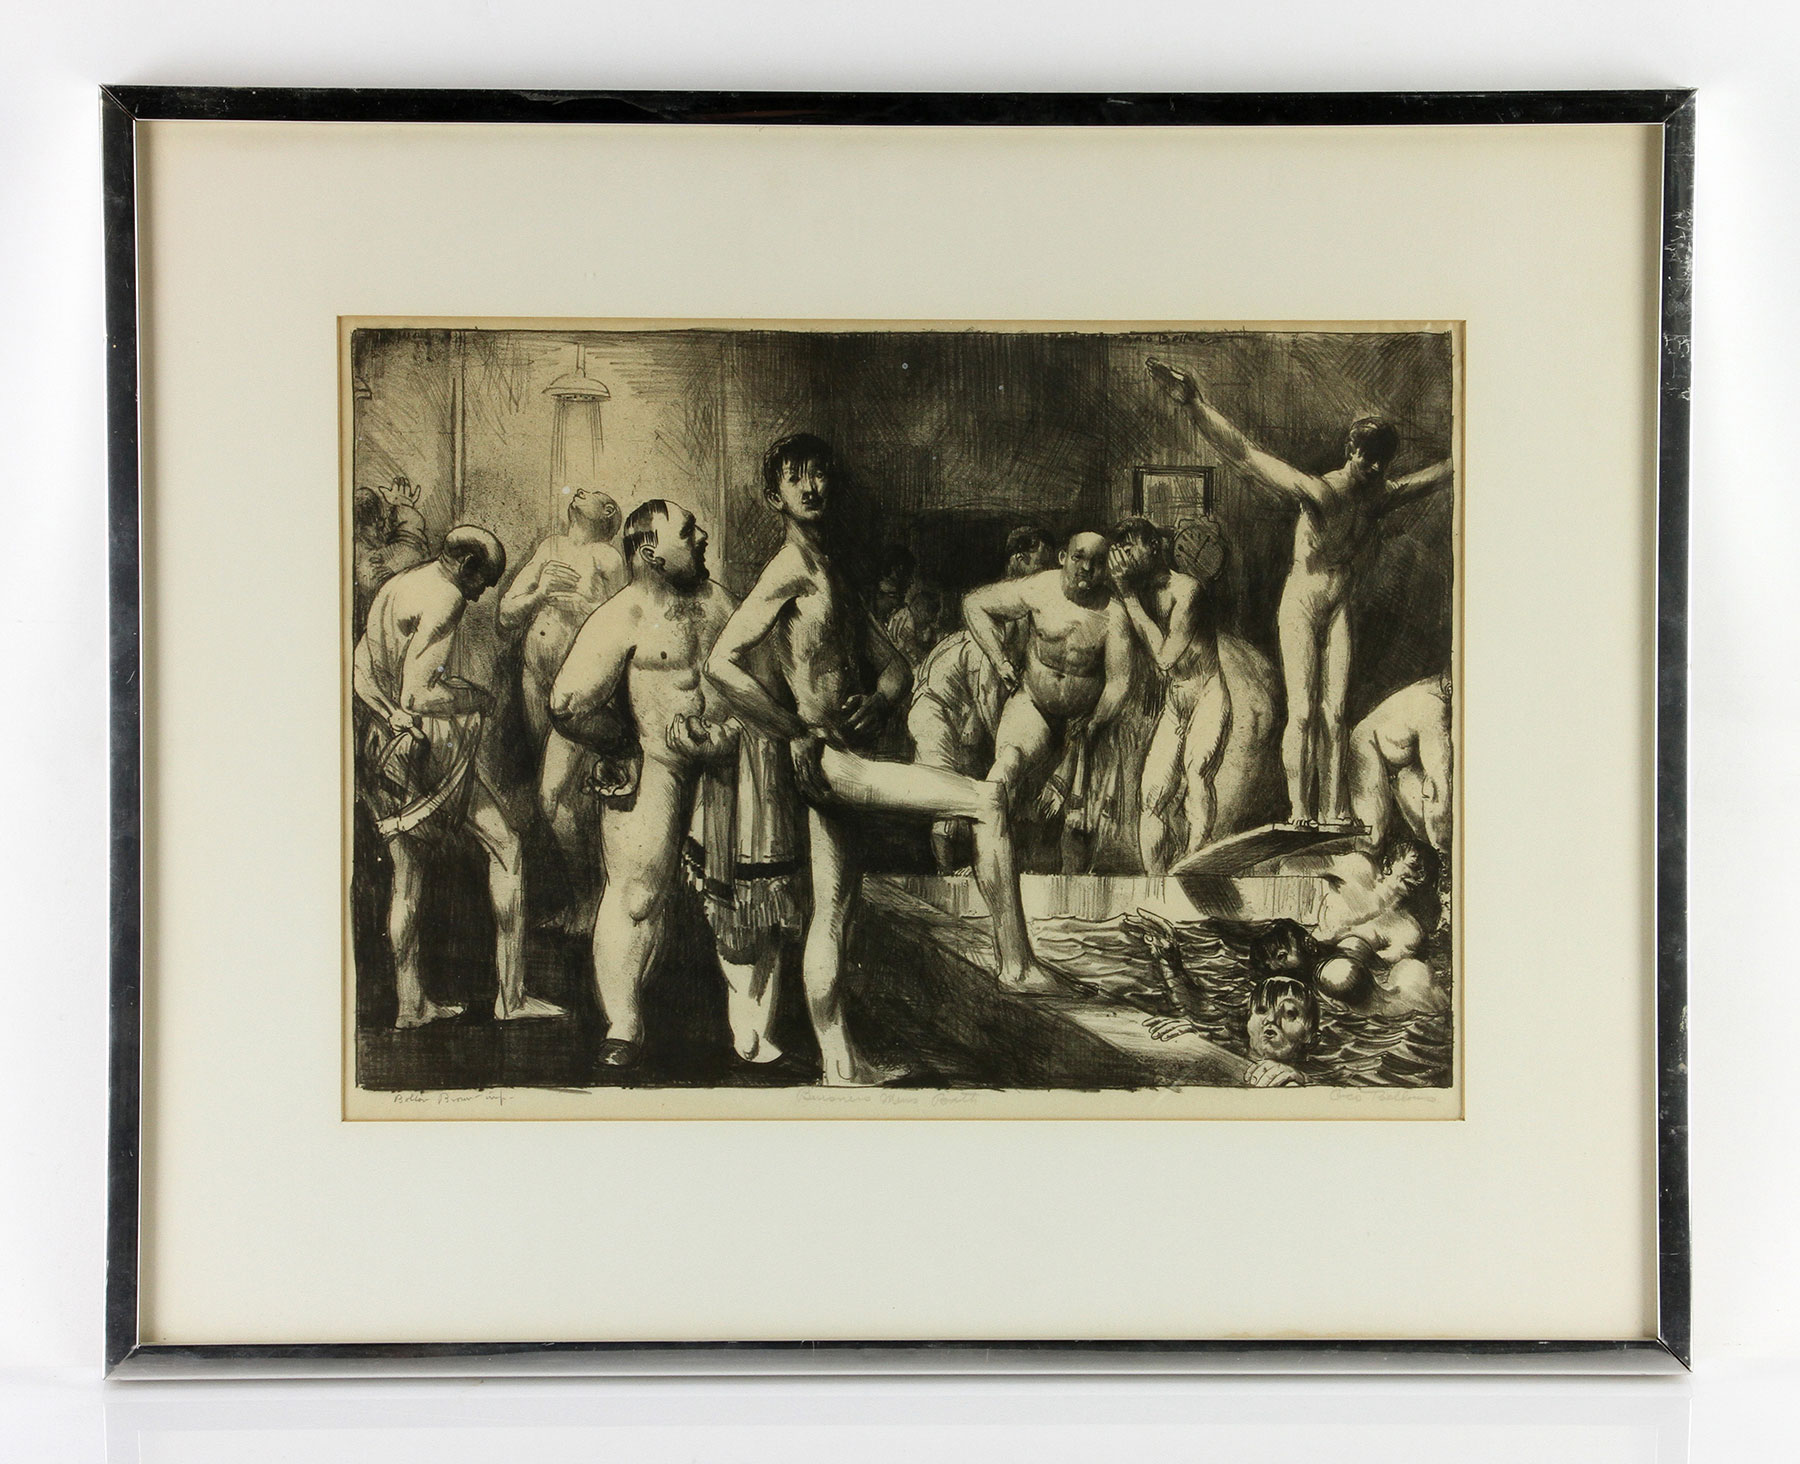 George Bellows (American, 1882-1925), "Business Men's Bath," lithograph, circa 1923, signed by the artist in pencil lower right